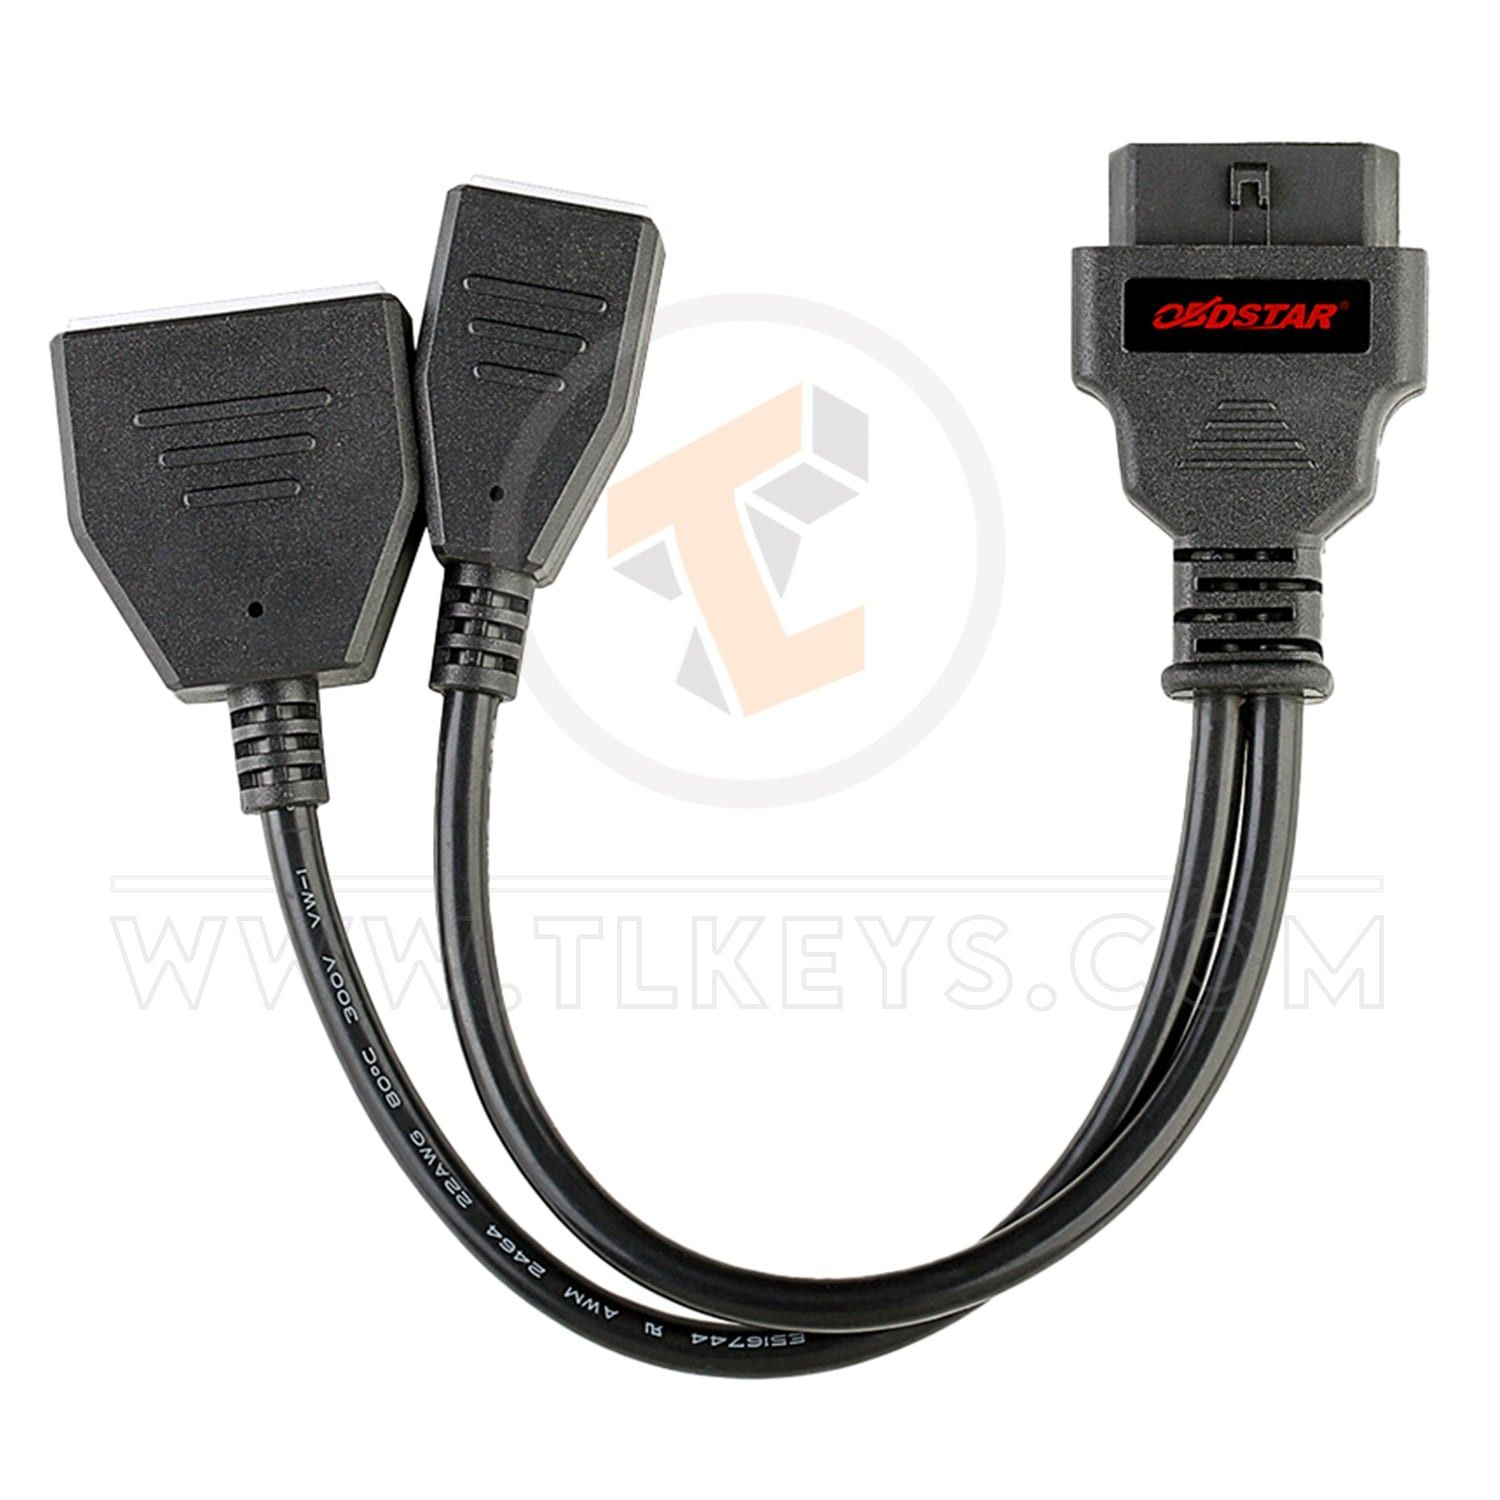 OBDStar NissanRenault 16 + 32 Cable Adapter Compatible devices X300 DP Plus